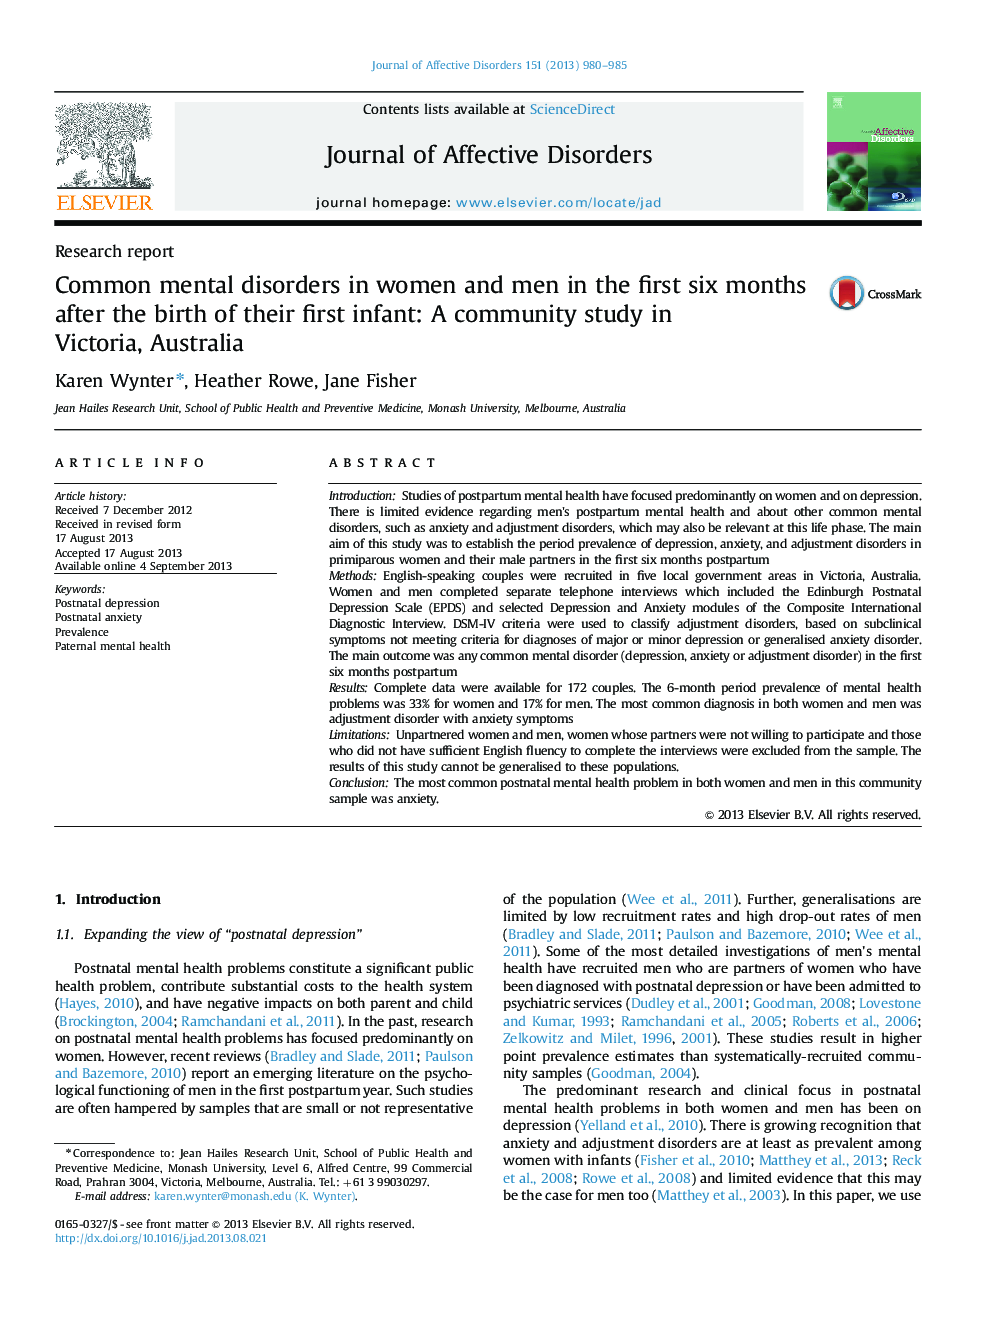 Common mental disorders in women and men in the first six months after the birth of their first infant: A community study in Victoria, Australia